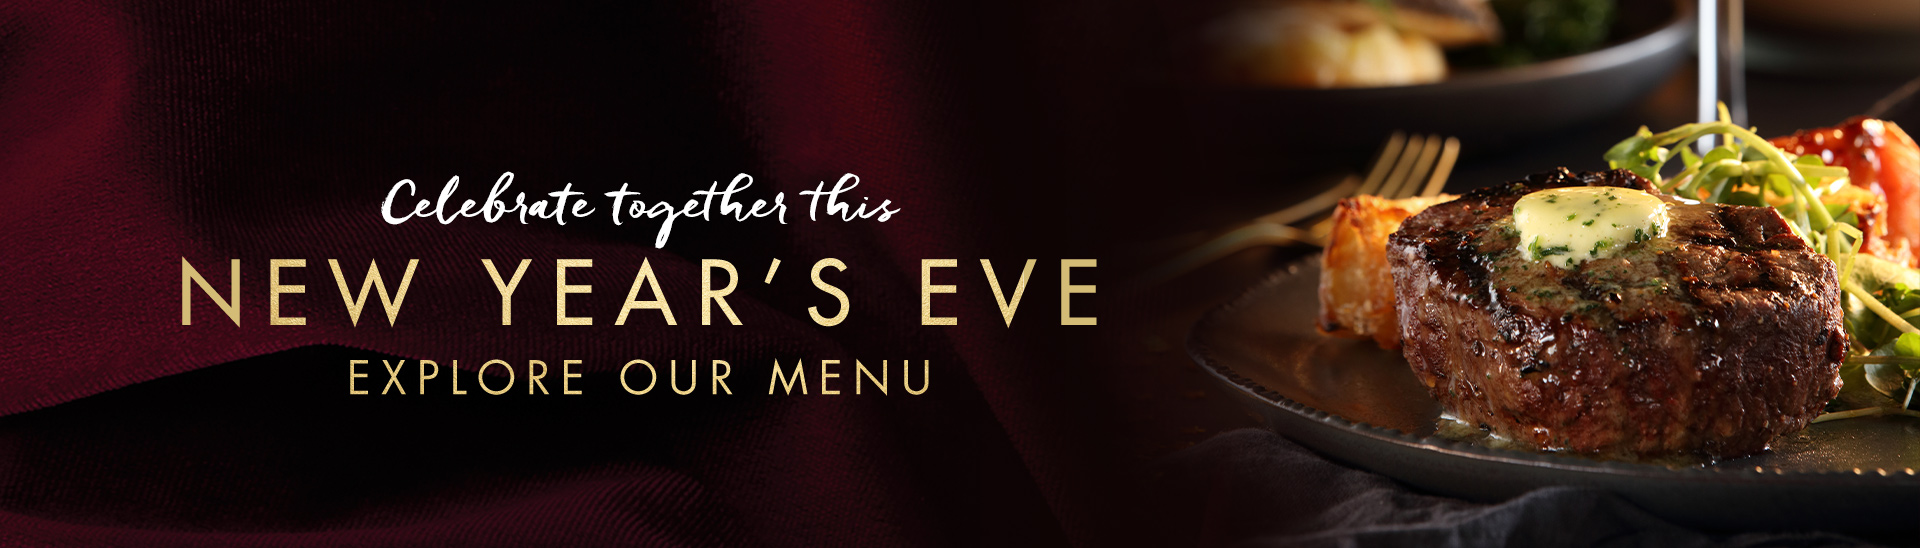 New Year’s eve menu at Miller & Carter Bournemouth 